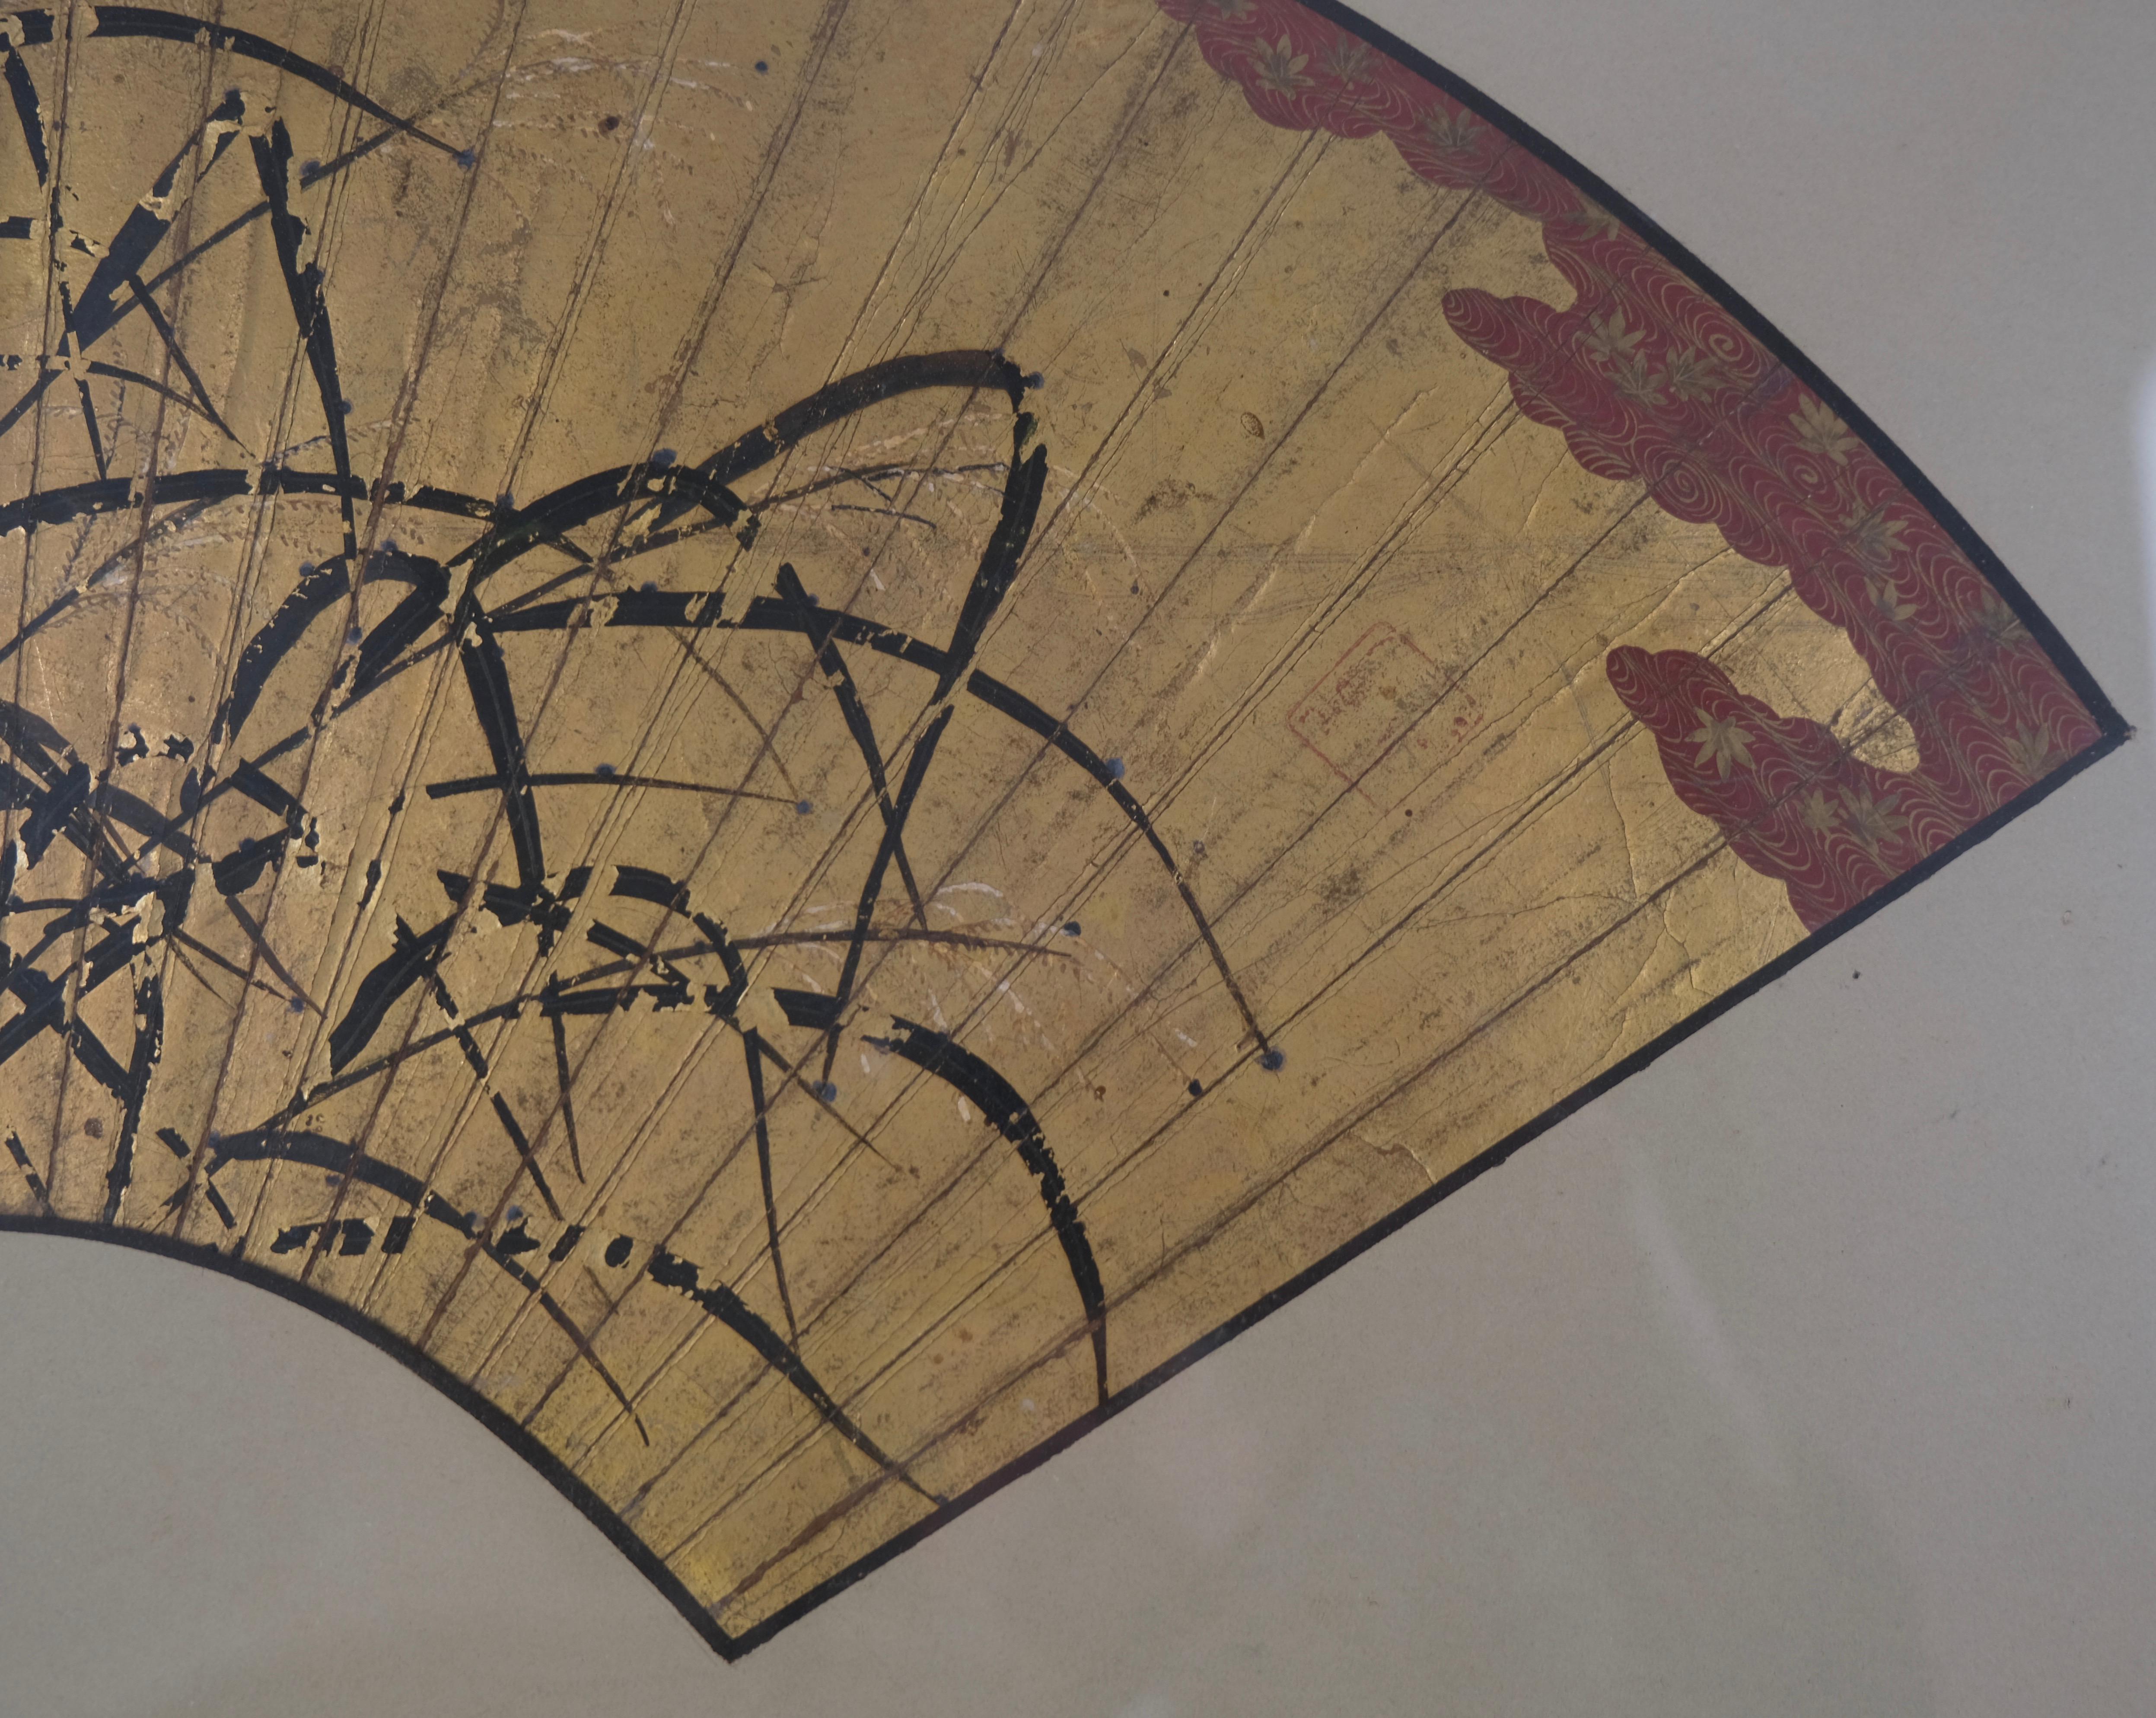 Hand-Painted Japanese Folding Fan, 19th C. Framed